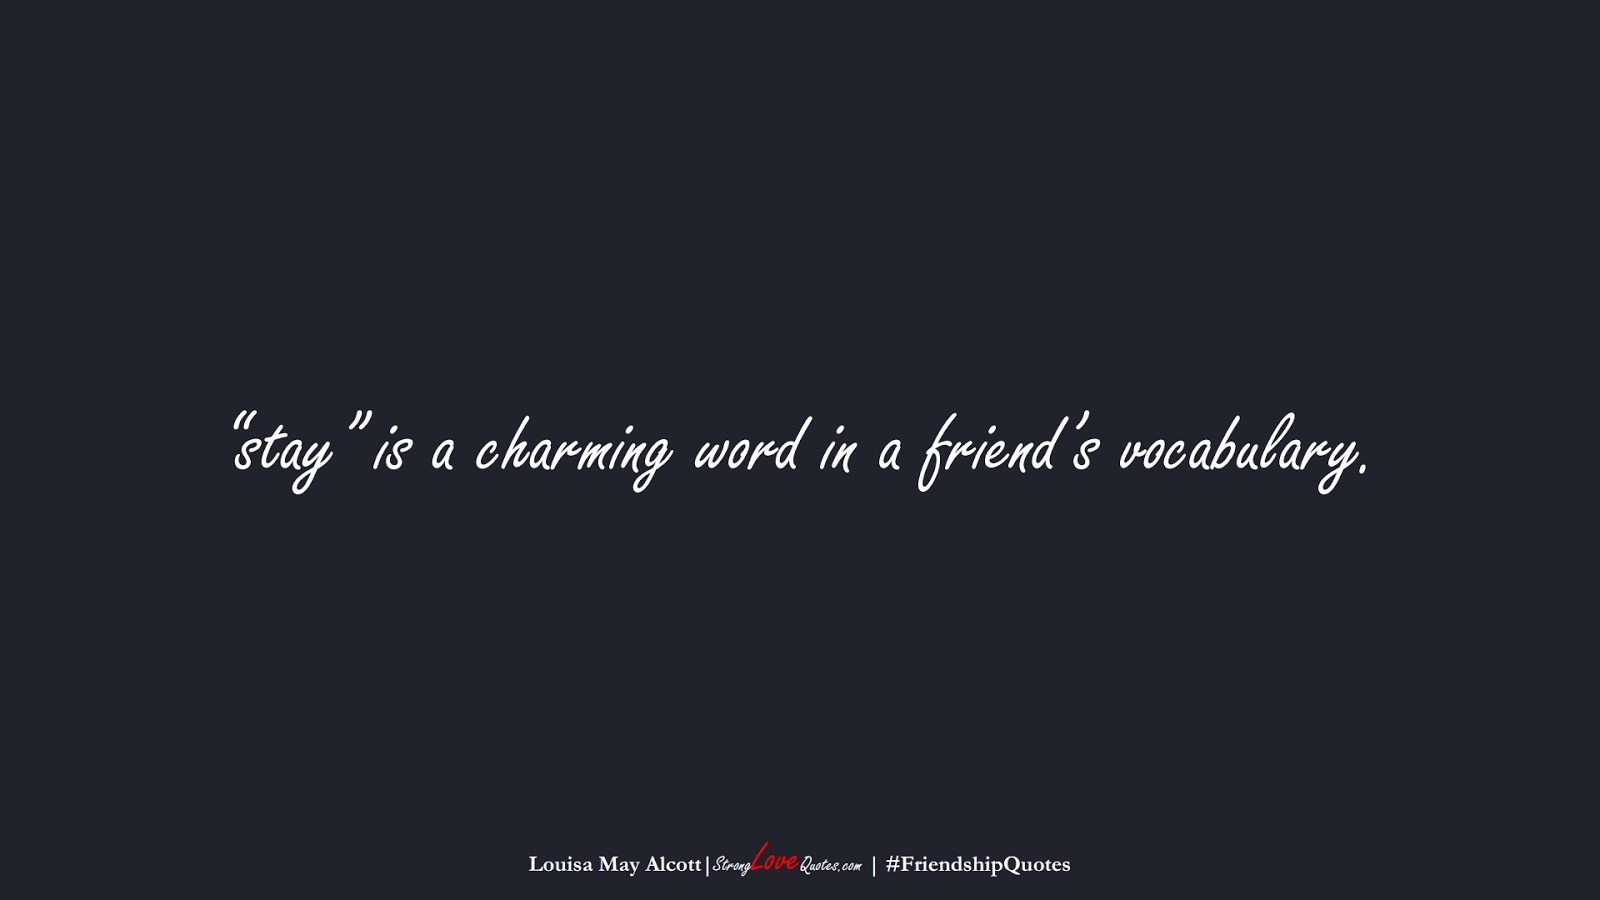 “stay” is a charming word in a friend’s vocabulary. (Louisa May Alcott);  #FriendshipQuotes